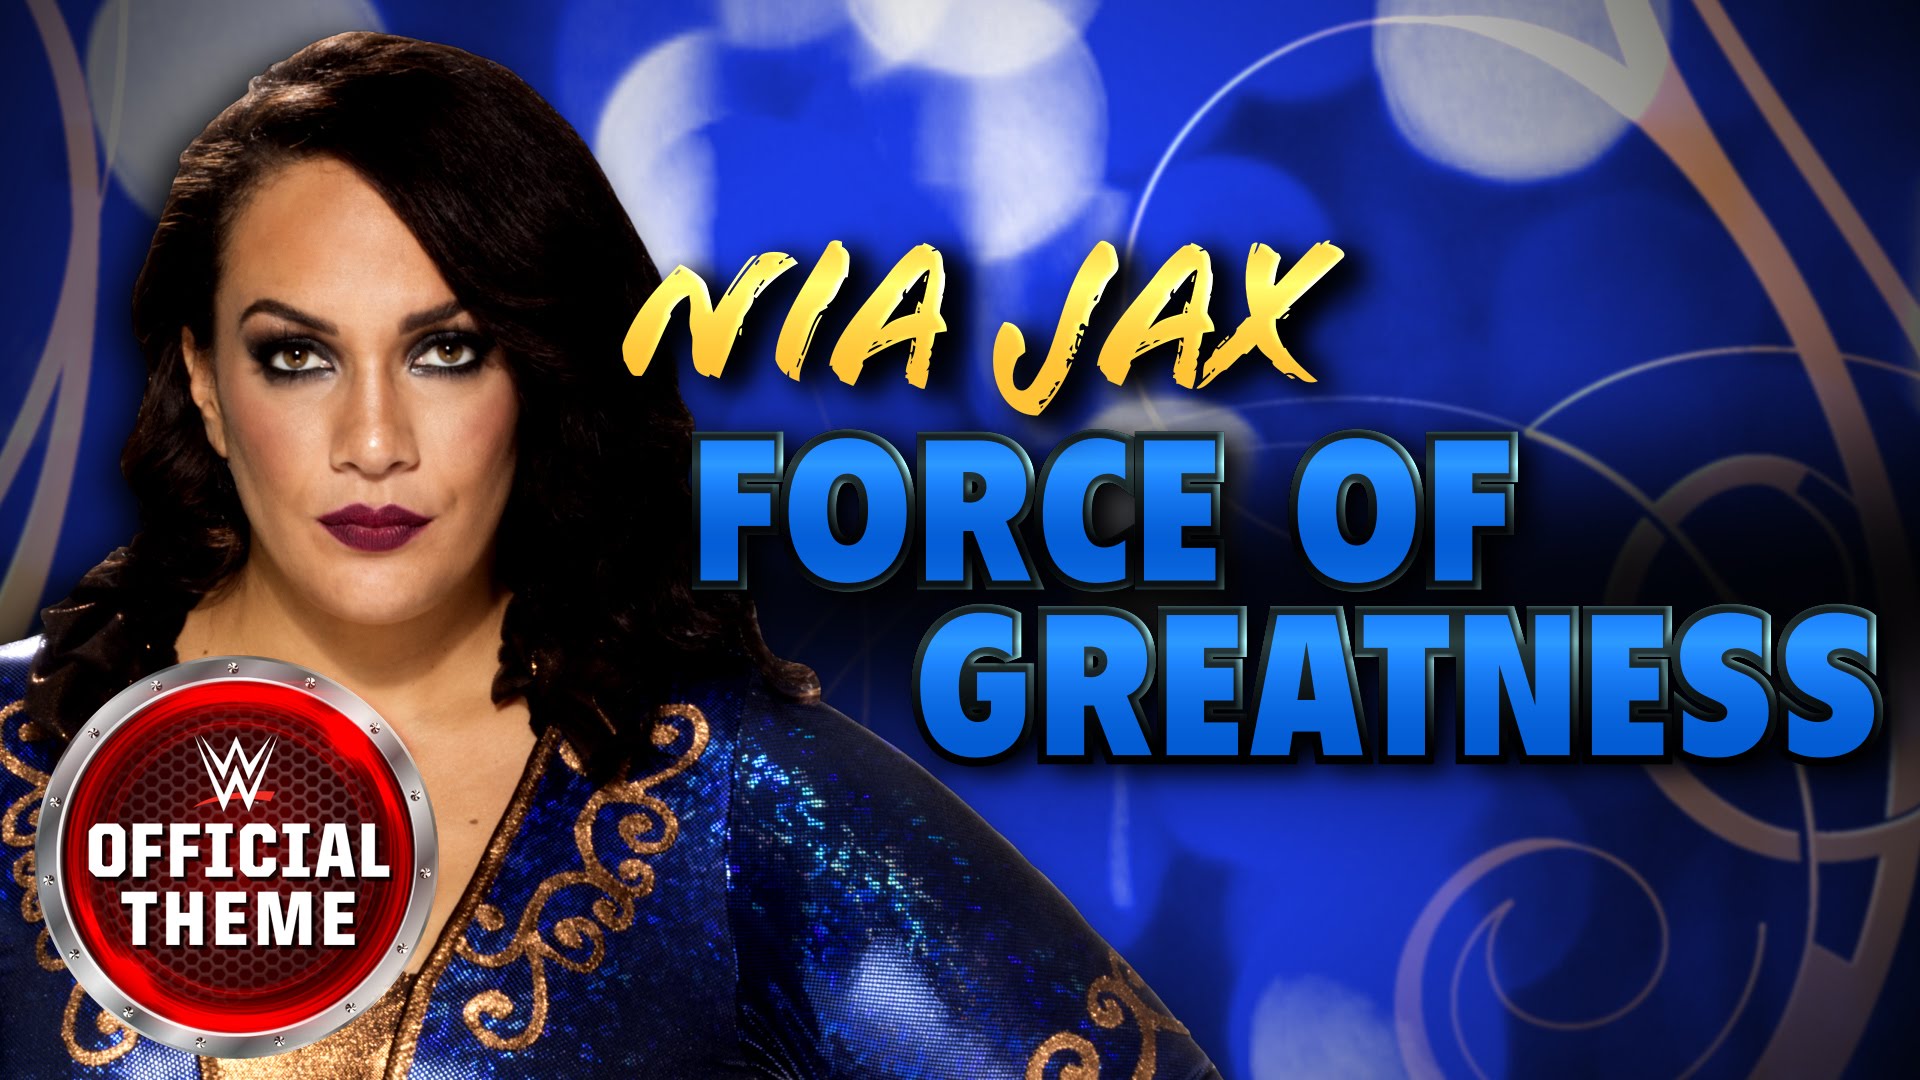 Nia Jax Force Of Greatness Official Theme